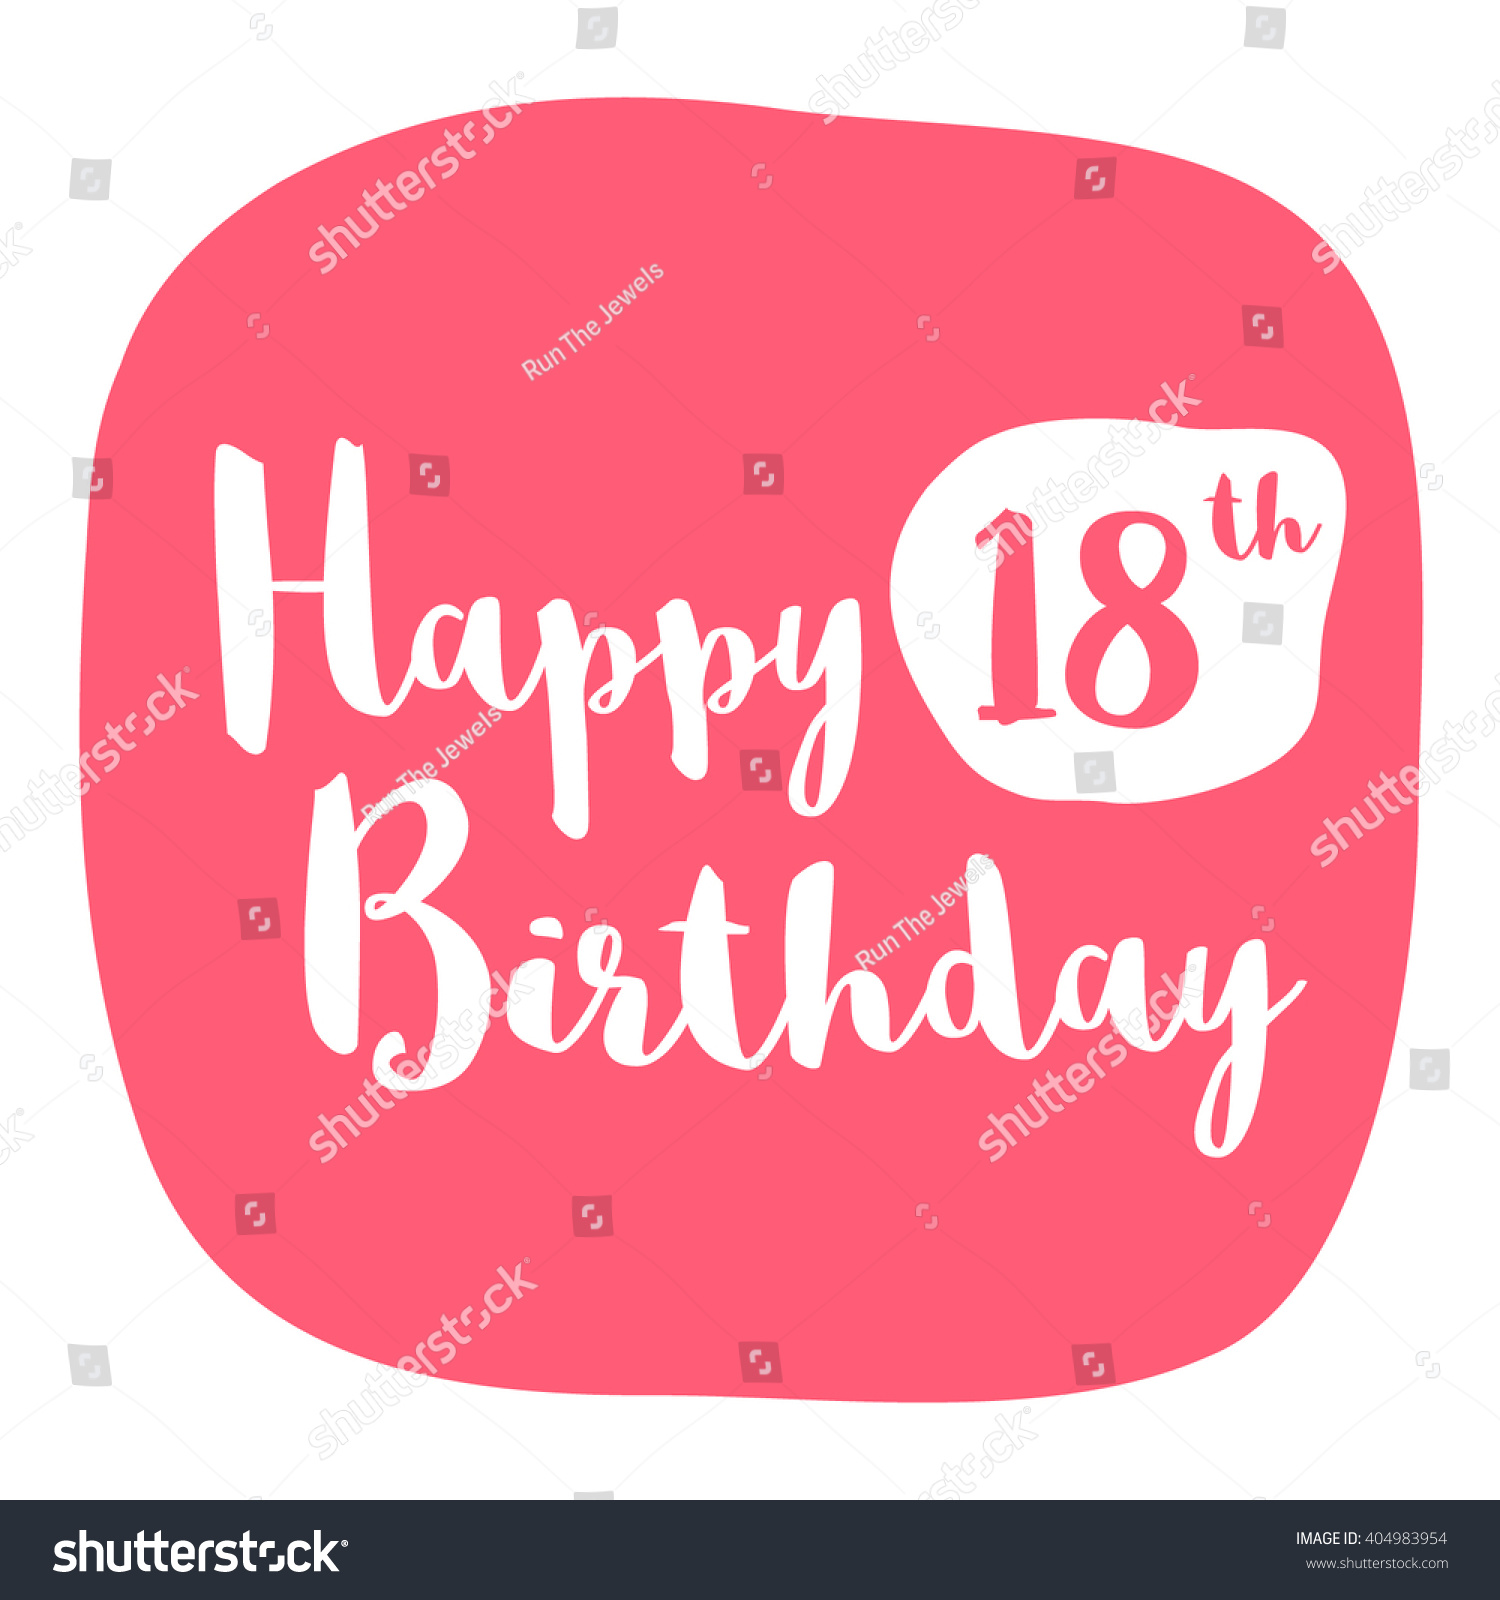 Download Happy 18th Birthday Card Brush Lettering Stock Vector ...